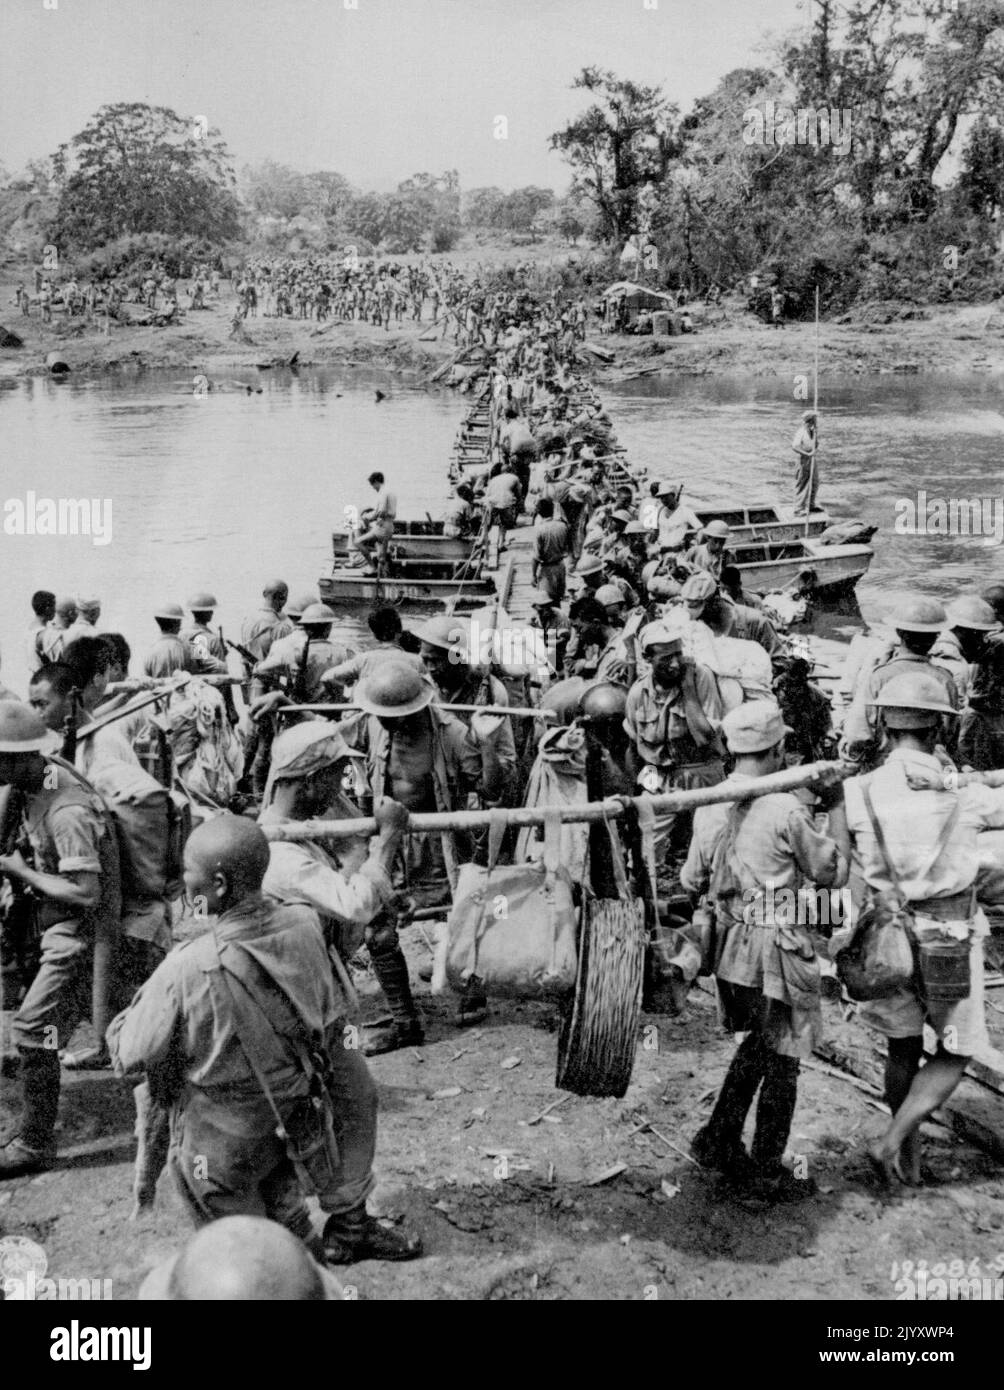 Yanks And Chinese On March In Burma -- American And Chinese troops cross an improvised bridge constructed of planks over empty gasoline cans lashed together, as they proceed over the Mogaung river on their way to Kamaing, Burma. March 08, 1944. (Photo by Associated Press Photo) Stock Photo